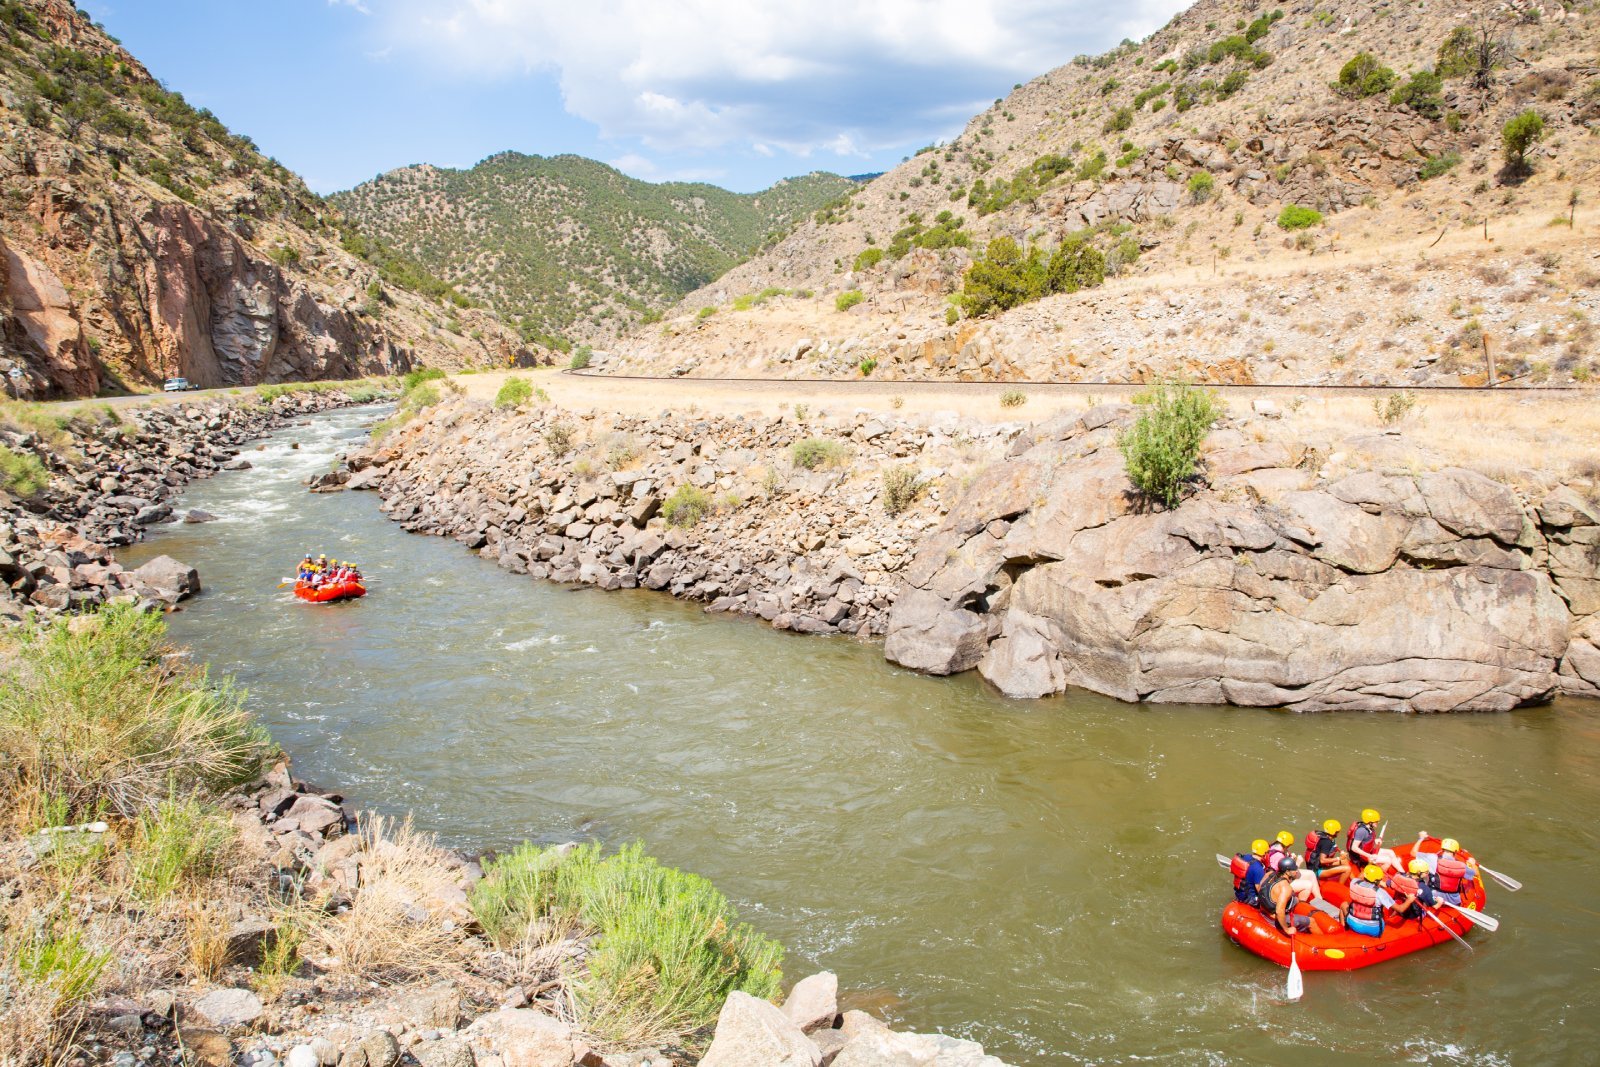 <p class="wp-caption-text">Image Credit: Shutterstock / Traveller70</p>  <p><span>Embrace the thrill of whitewater rafting with spring runoff making the rapids wilder. Trips on the Arkansas River start at about $70 per person.</span></p>